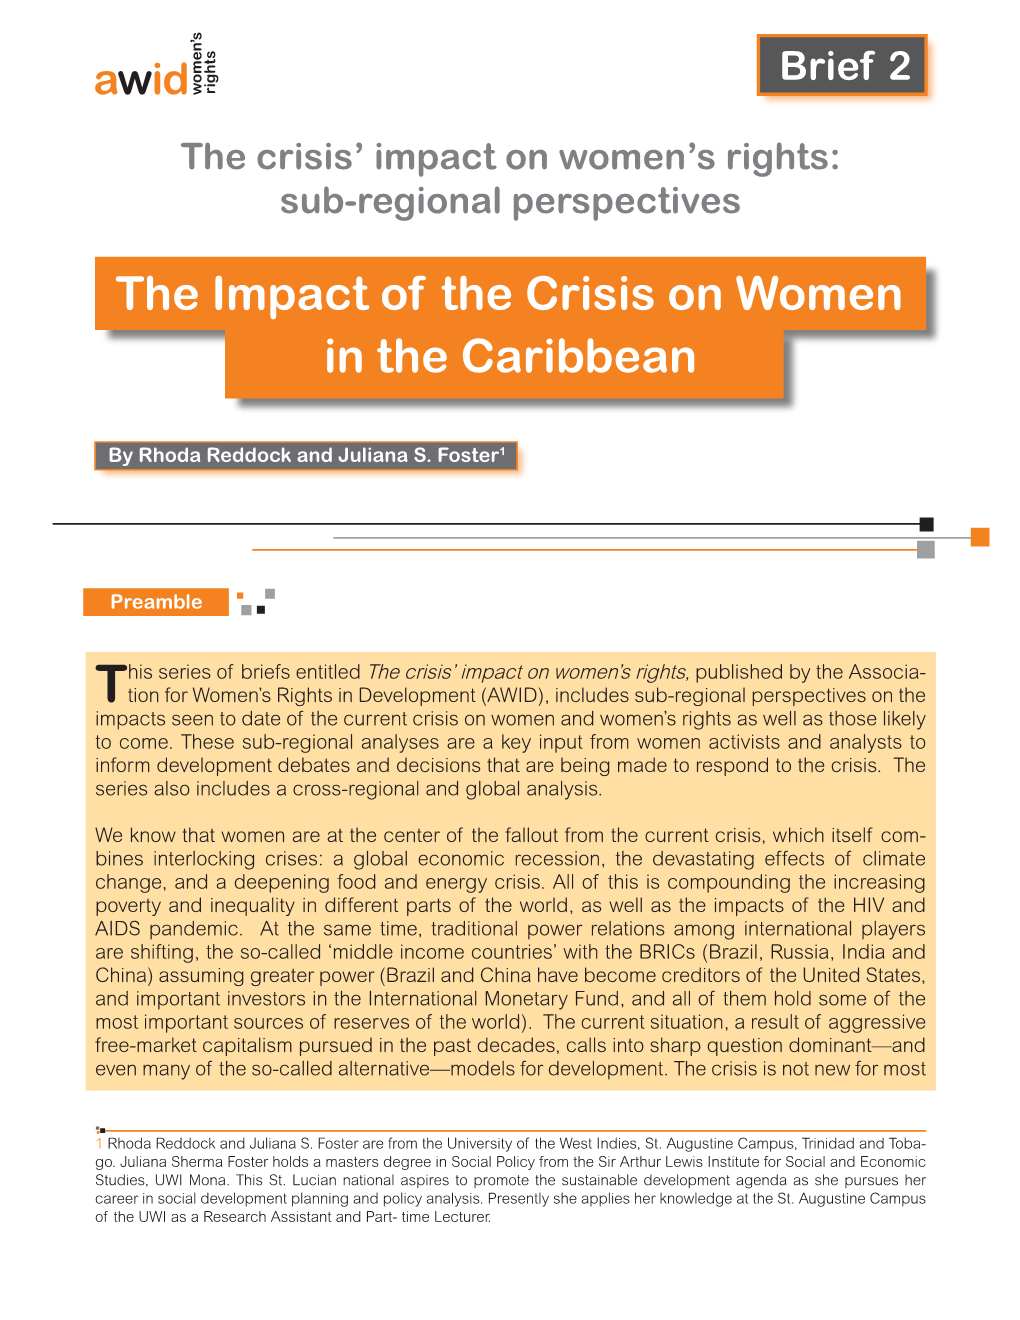 In the Caribbean the Impact of the Crisis on Women